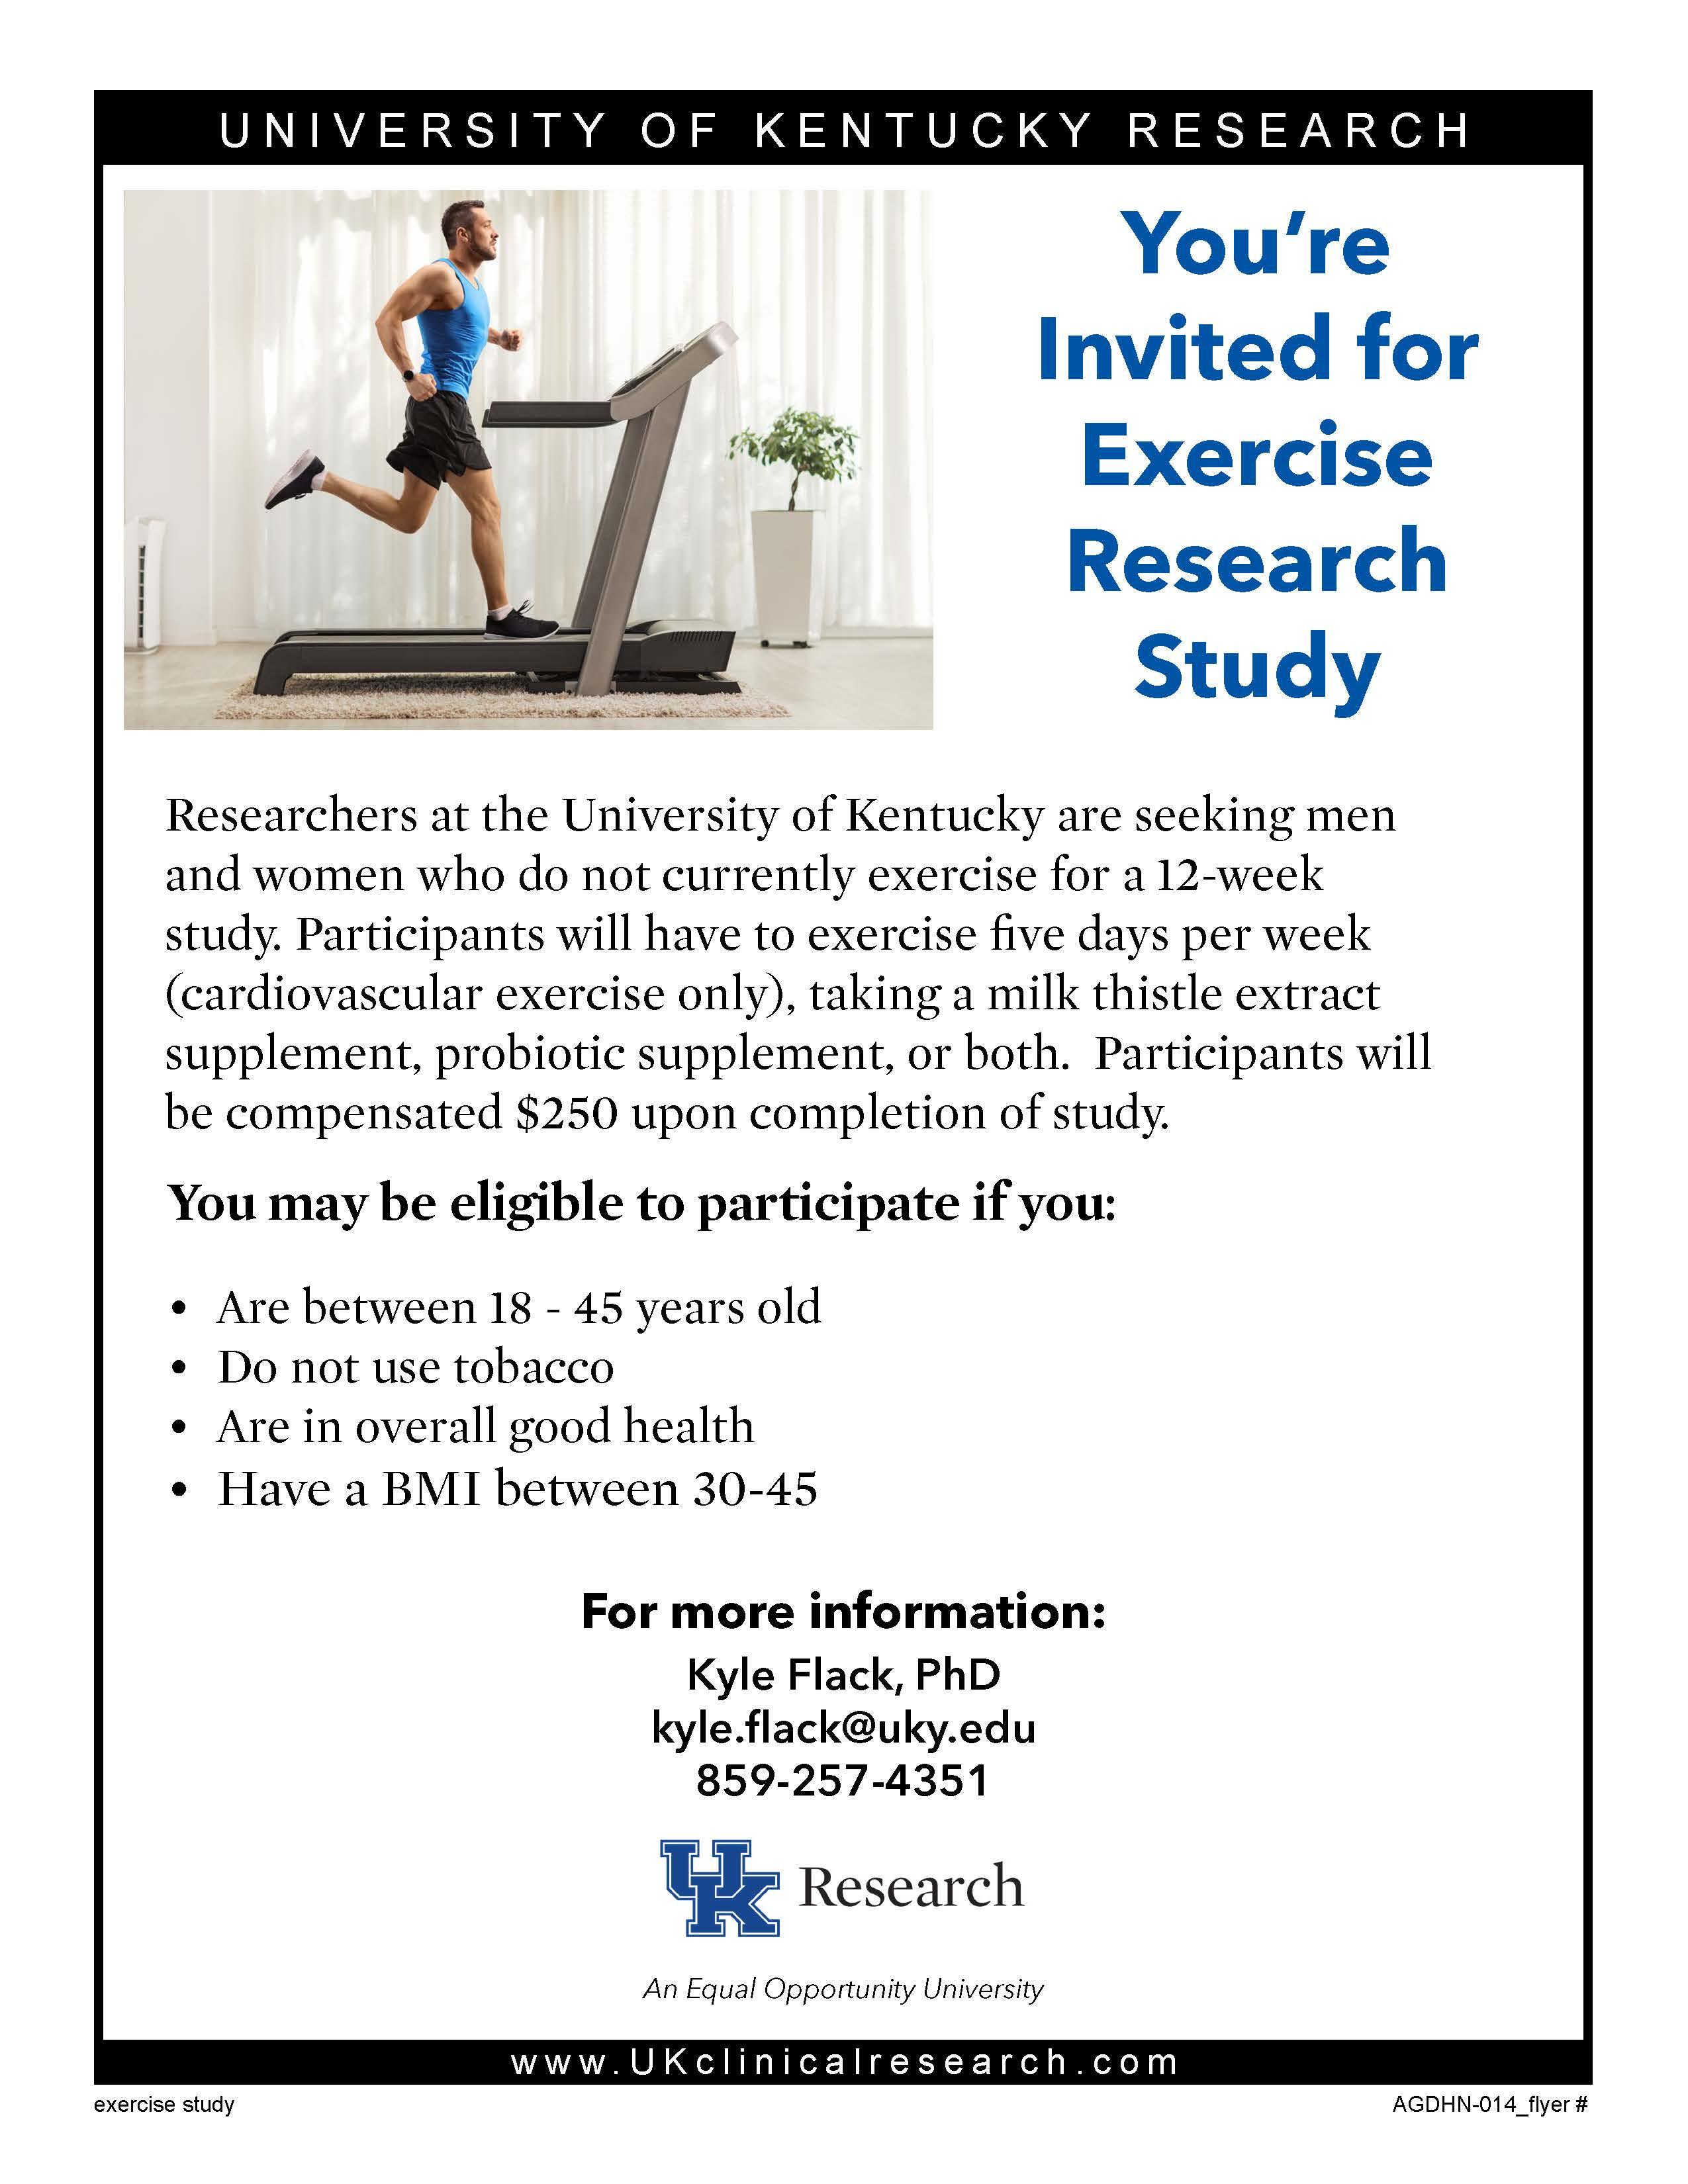 Research flyer